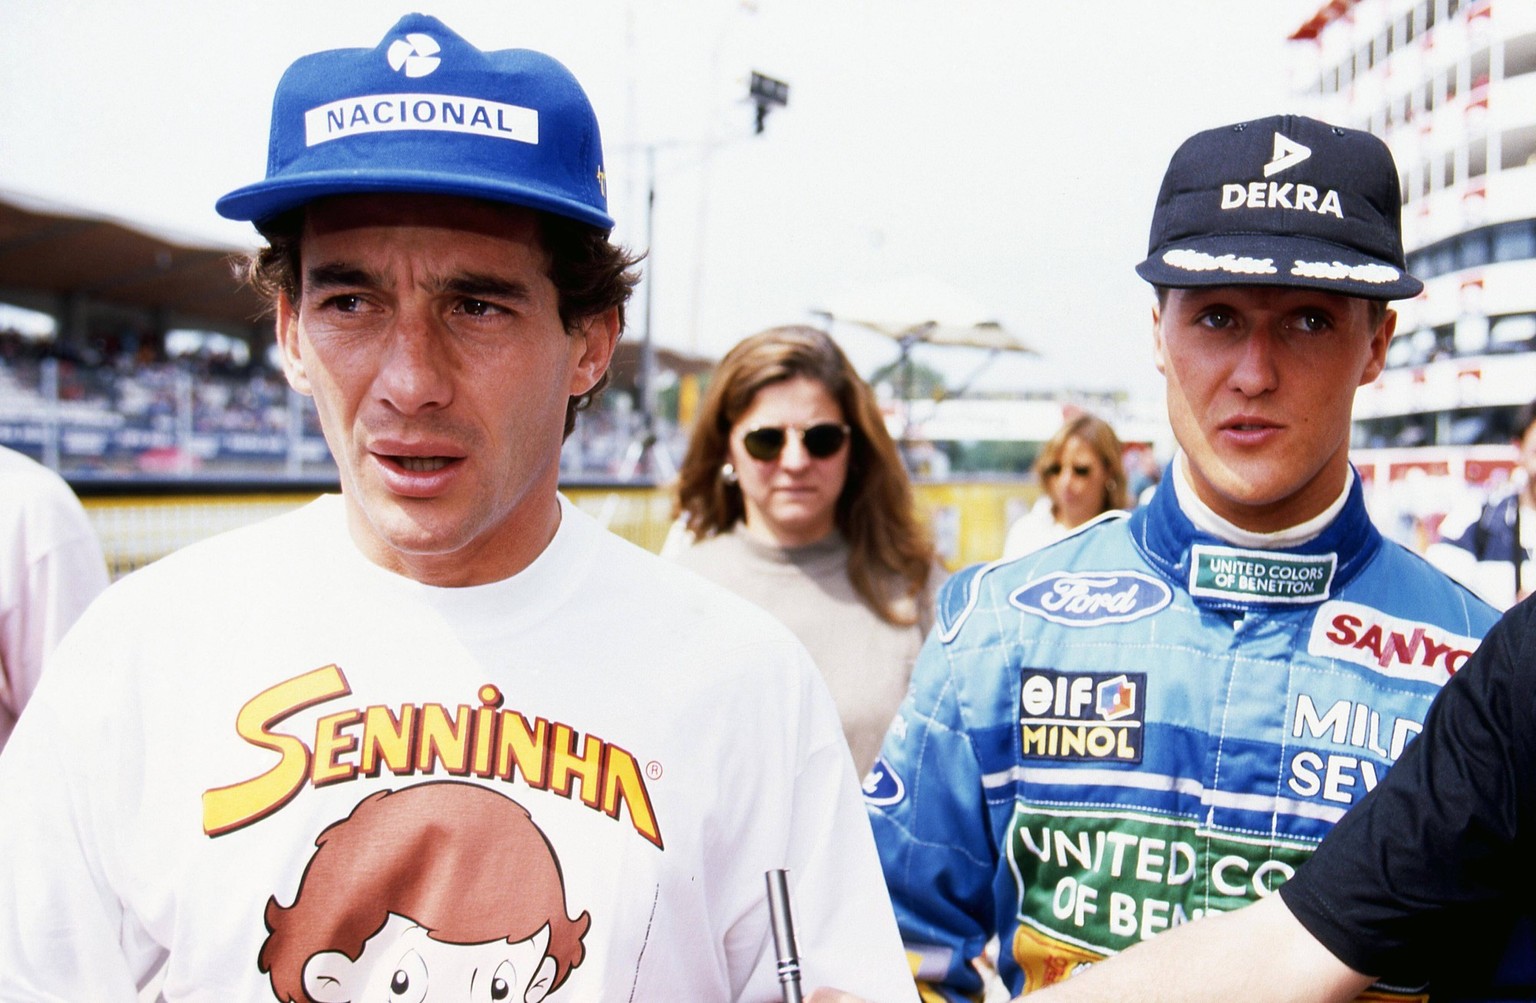 San Marino Grand Prix, Rd 3, Imola, Italy, 1 May 1994.s Ayrton Senna BRA Williams Left and Michael Schumacher GER Benetton Right are quizzed on the reformation of the GPDA following the previous days  ...